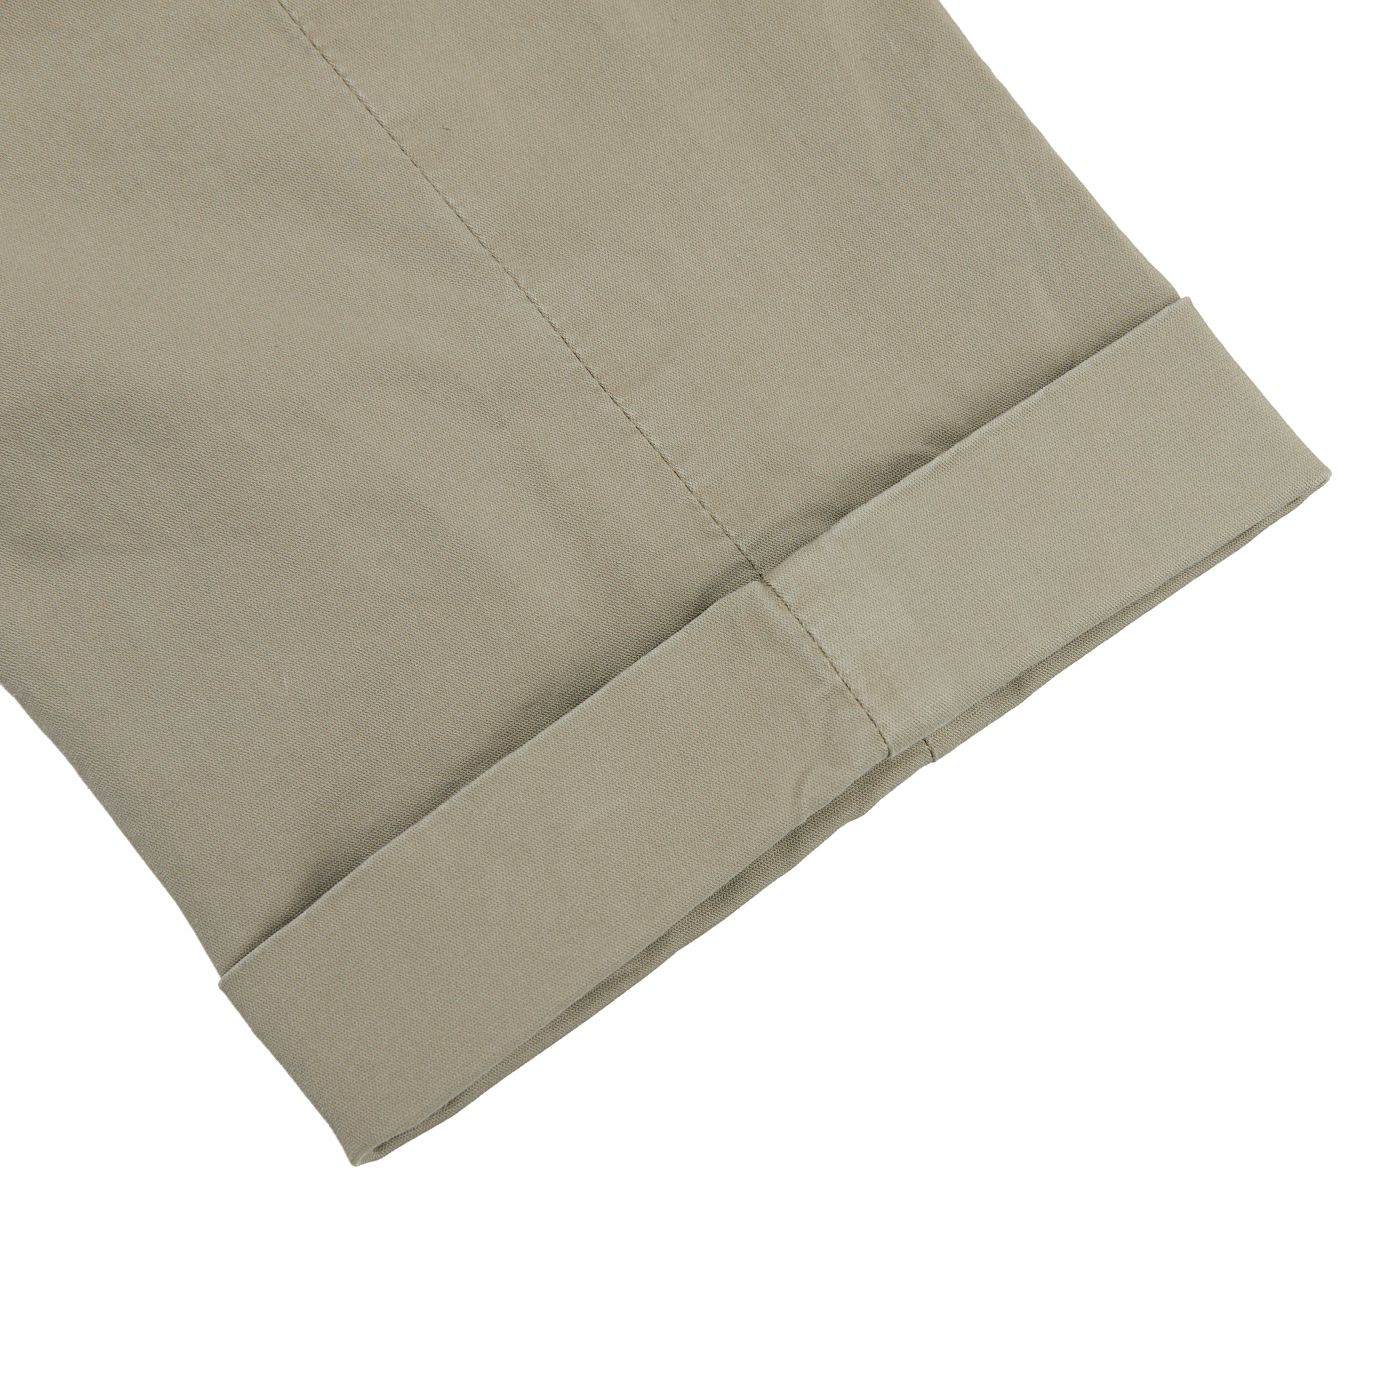 A close up of Briglia Mole Cotton Stretch BG07 Pleated Chinos, featuring cotton with stretch for added comfort.